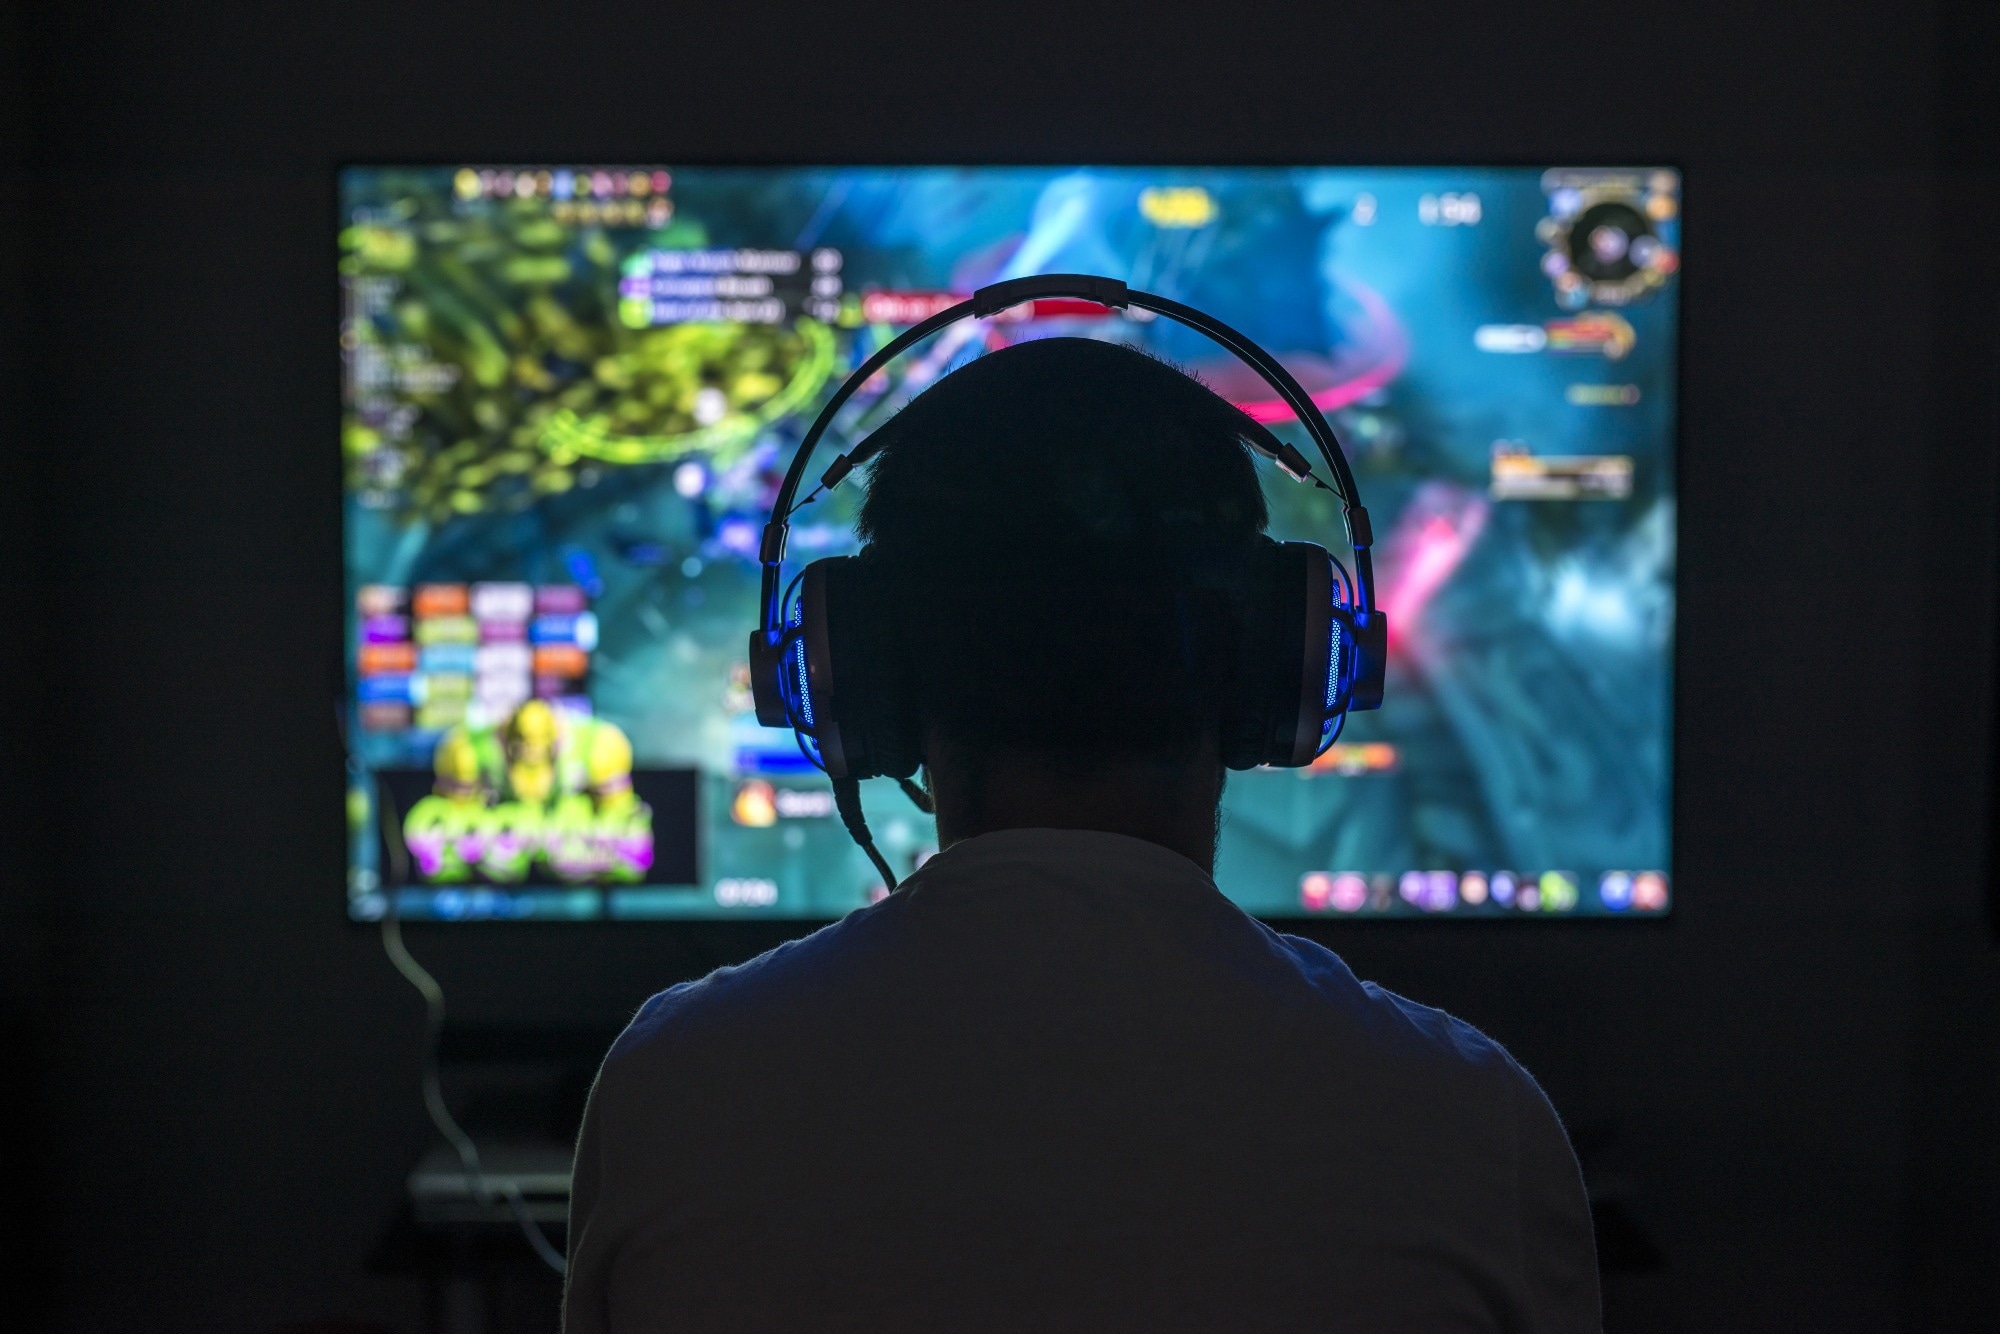 Study: Impulsivity and aggression as risk factors for internet gaming disorder among university students. Image Credit: sezer66/Shutterstock.com